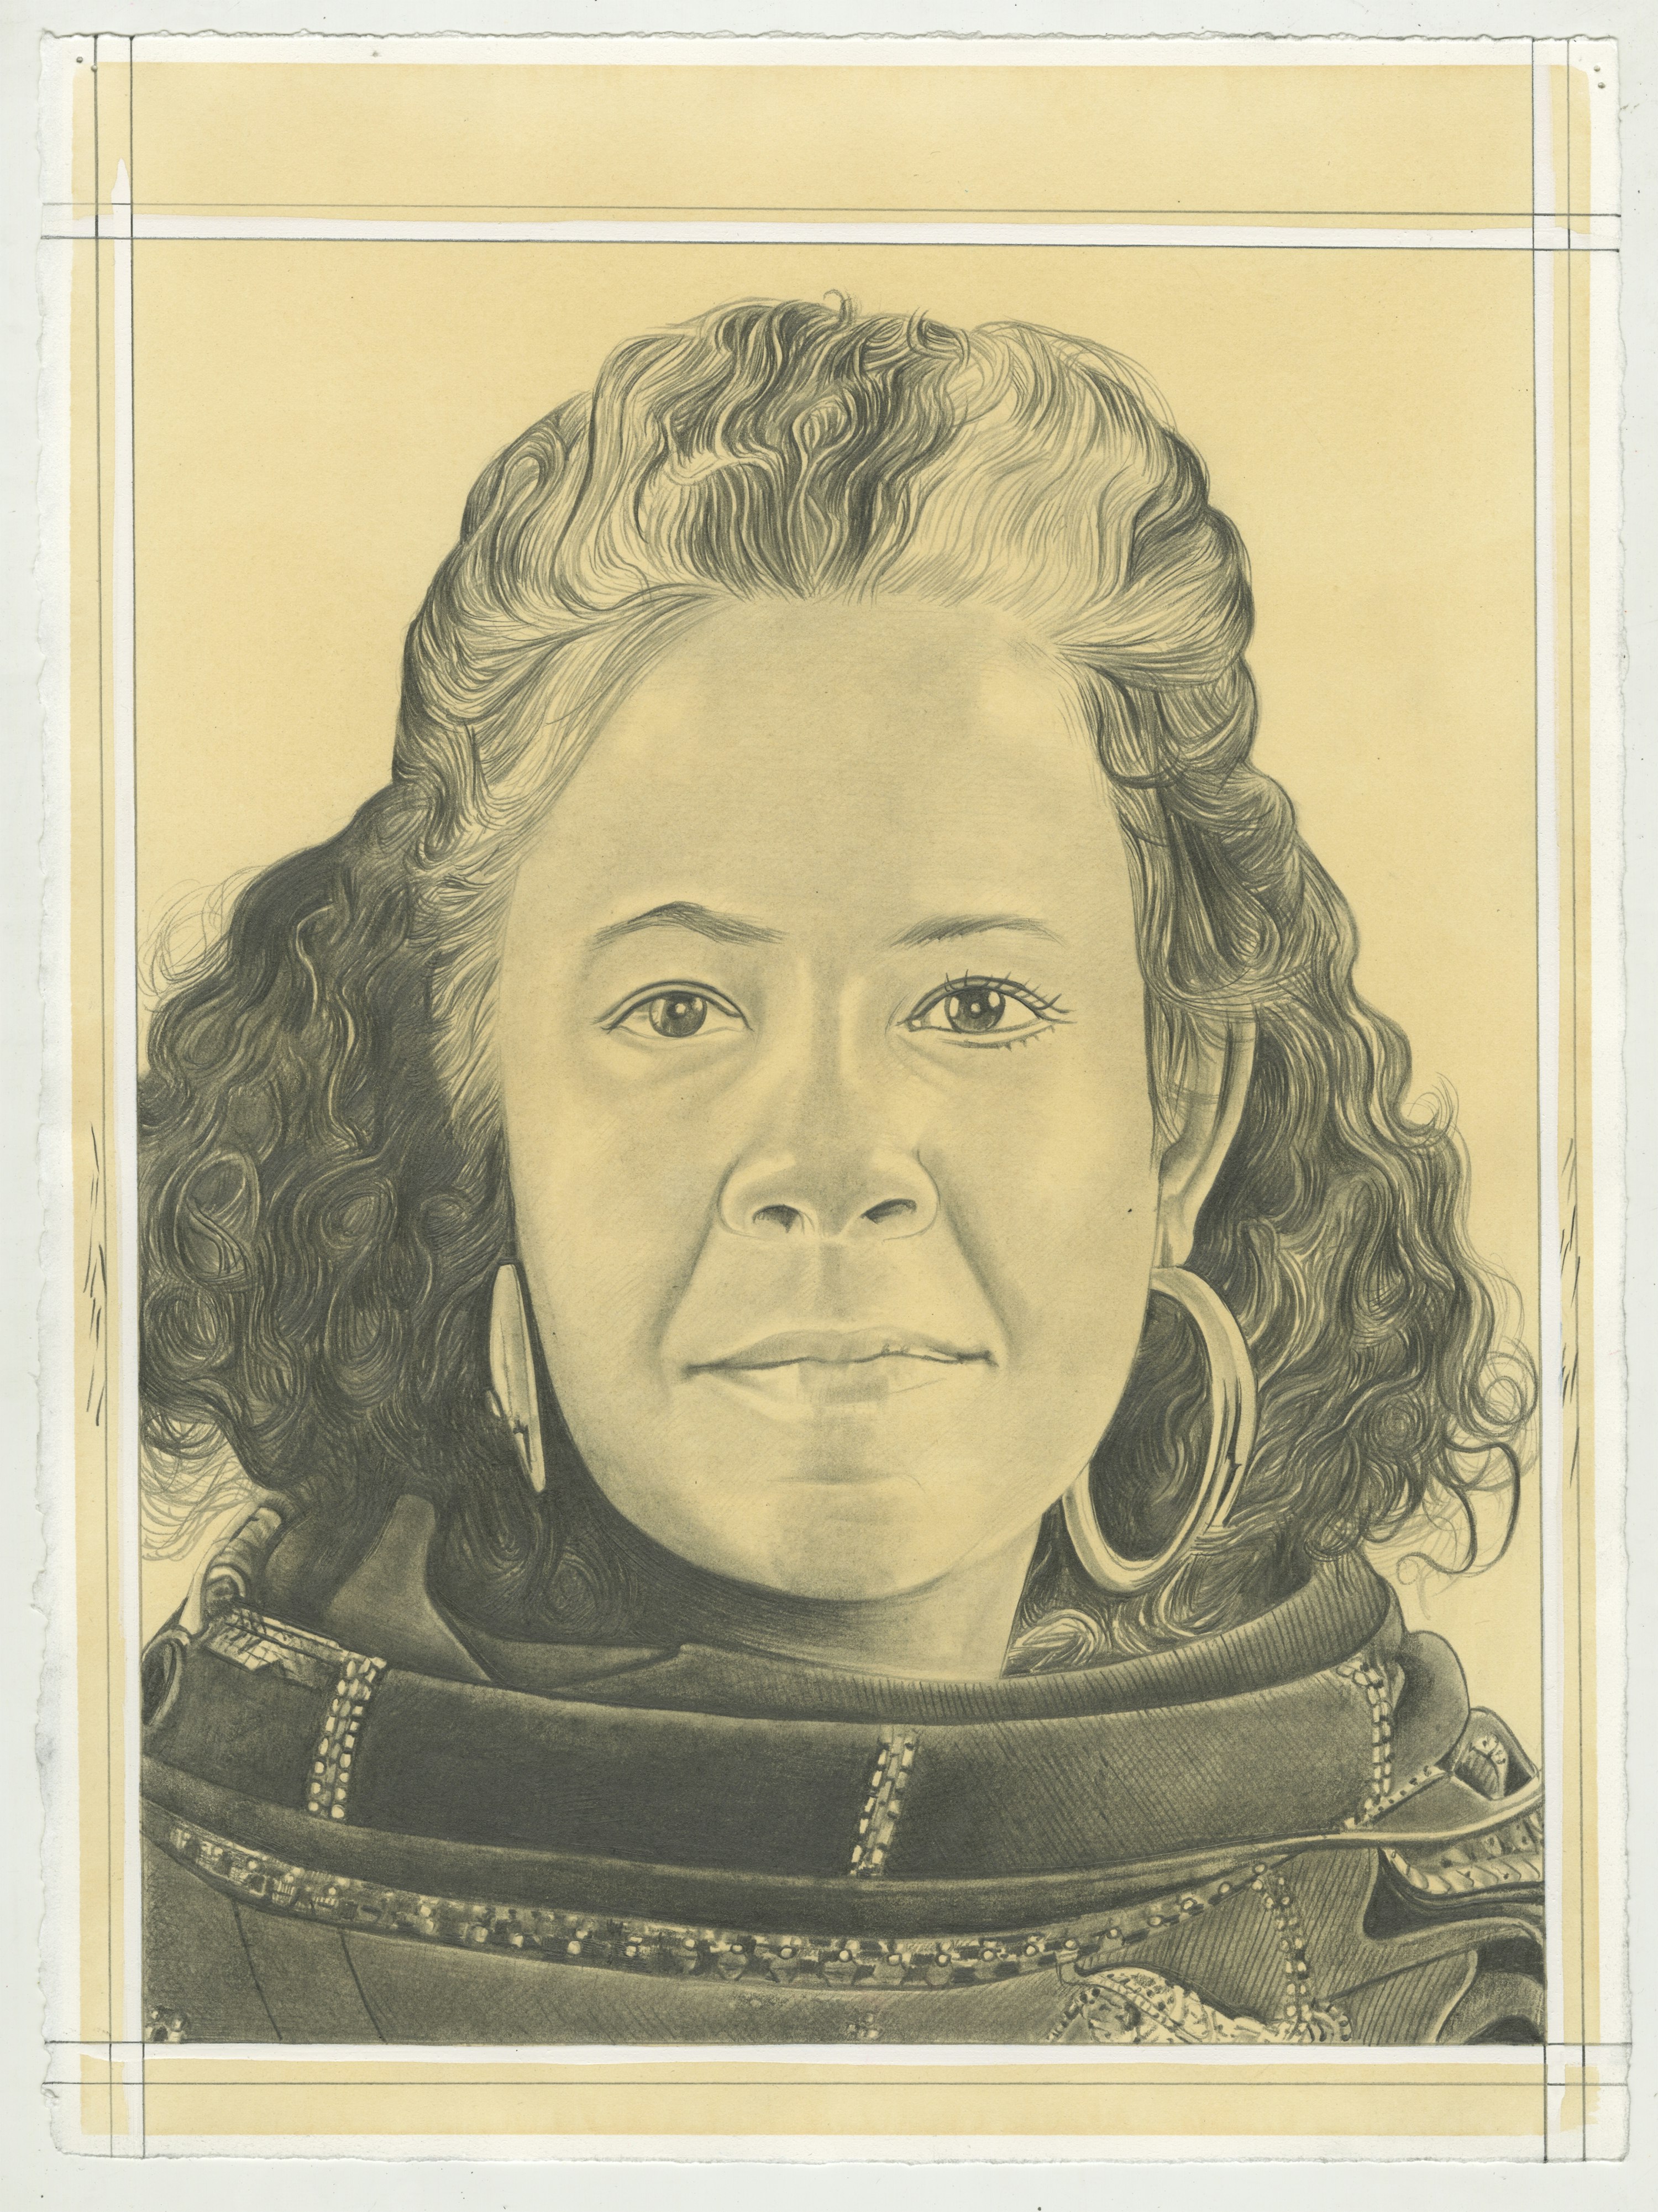 Portrait of Torkwase Dyson, pencil on paper by Phong H. Bui.